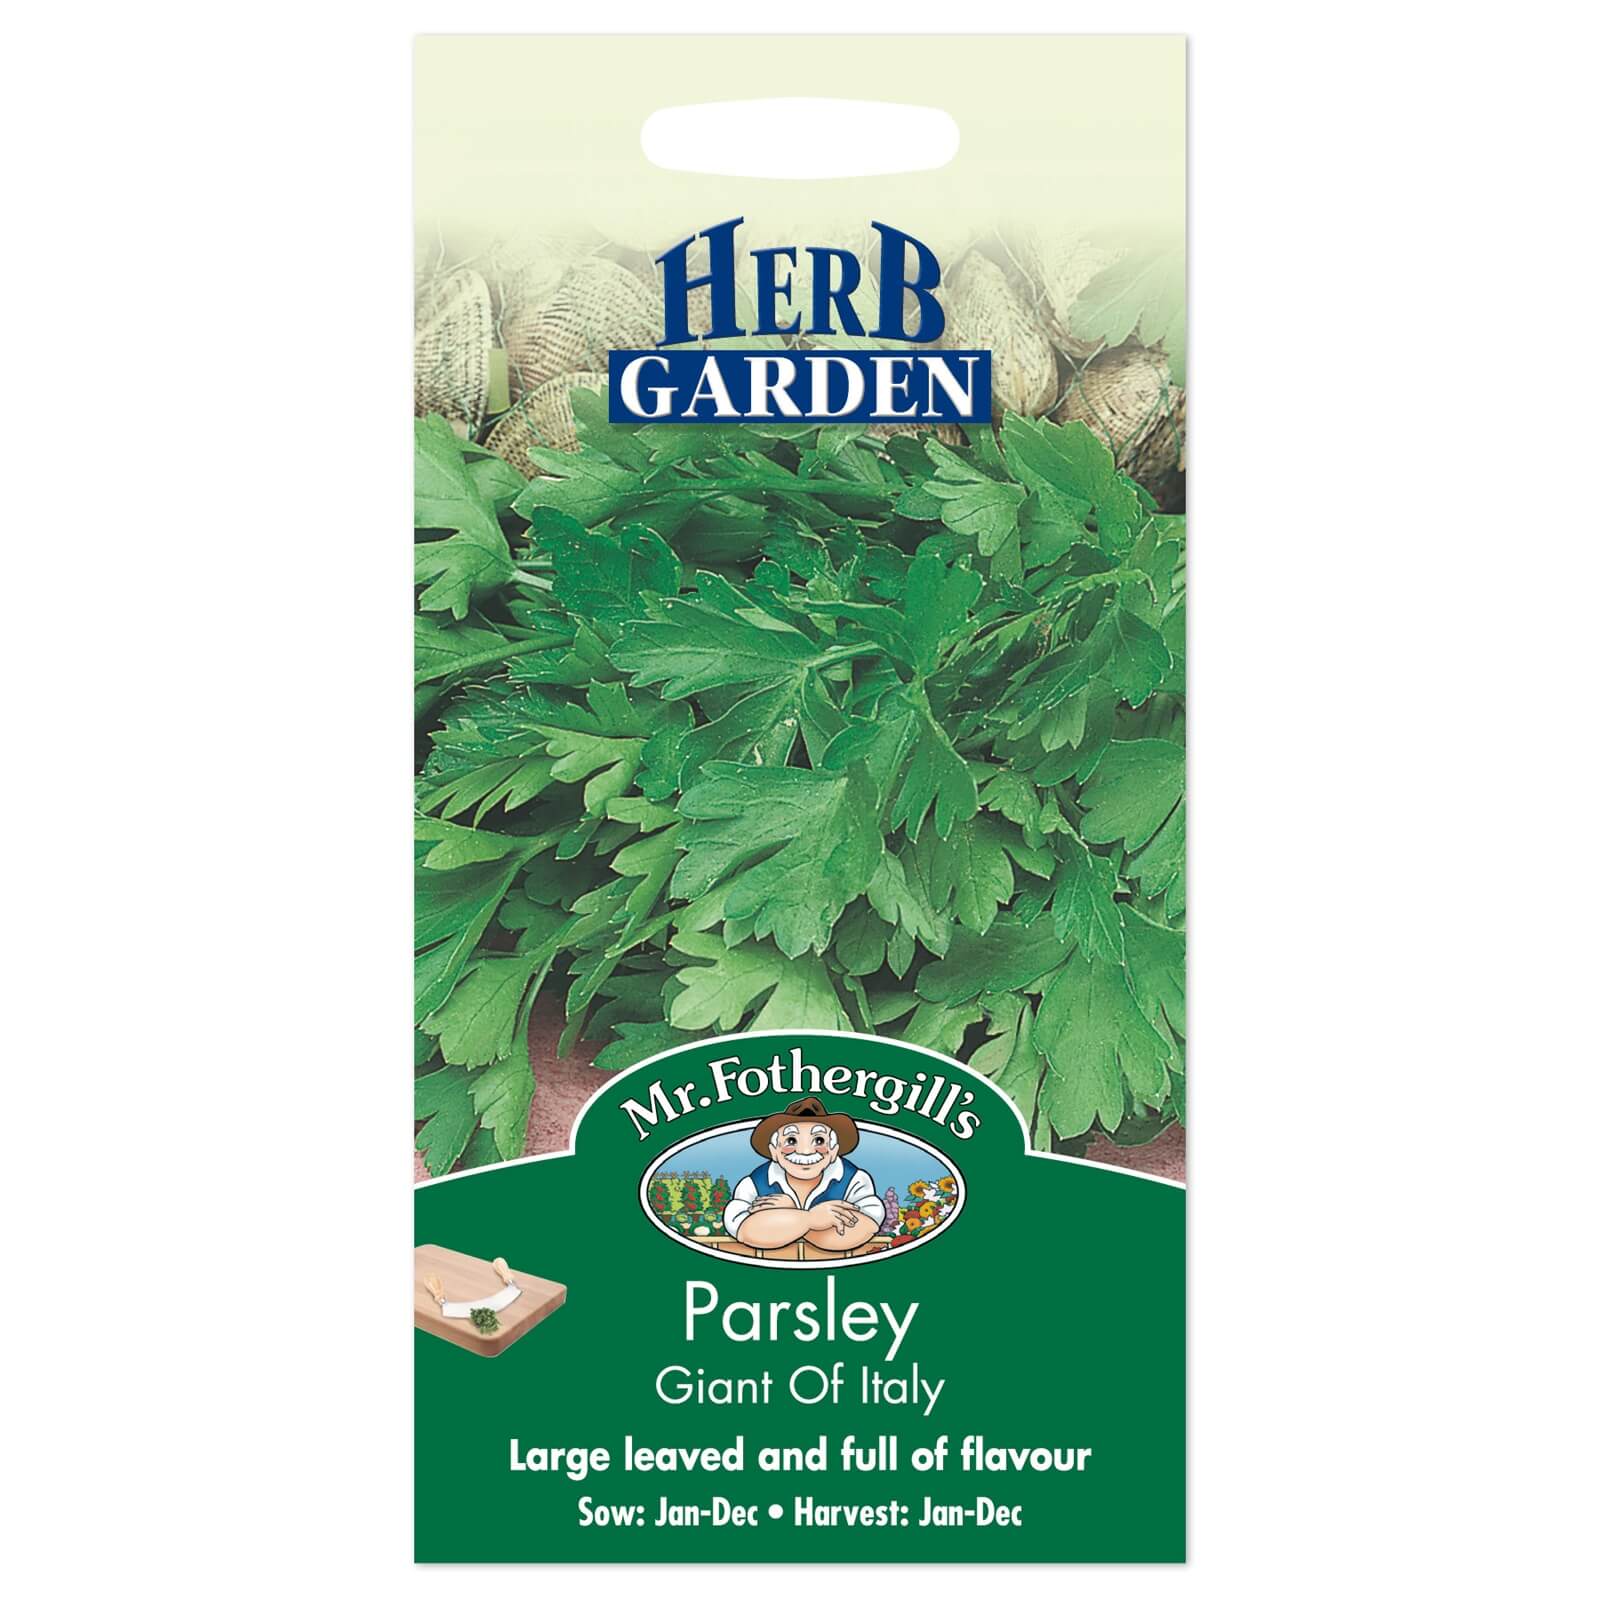 Mr. Fothergill's Parsley Giant Of Italy Seeds